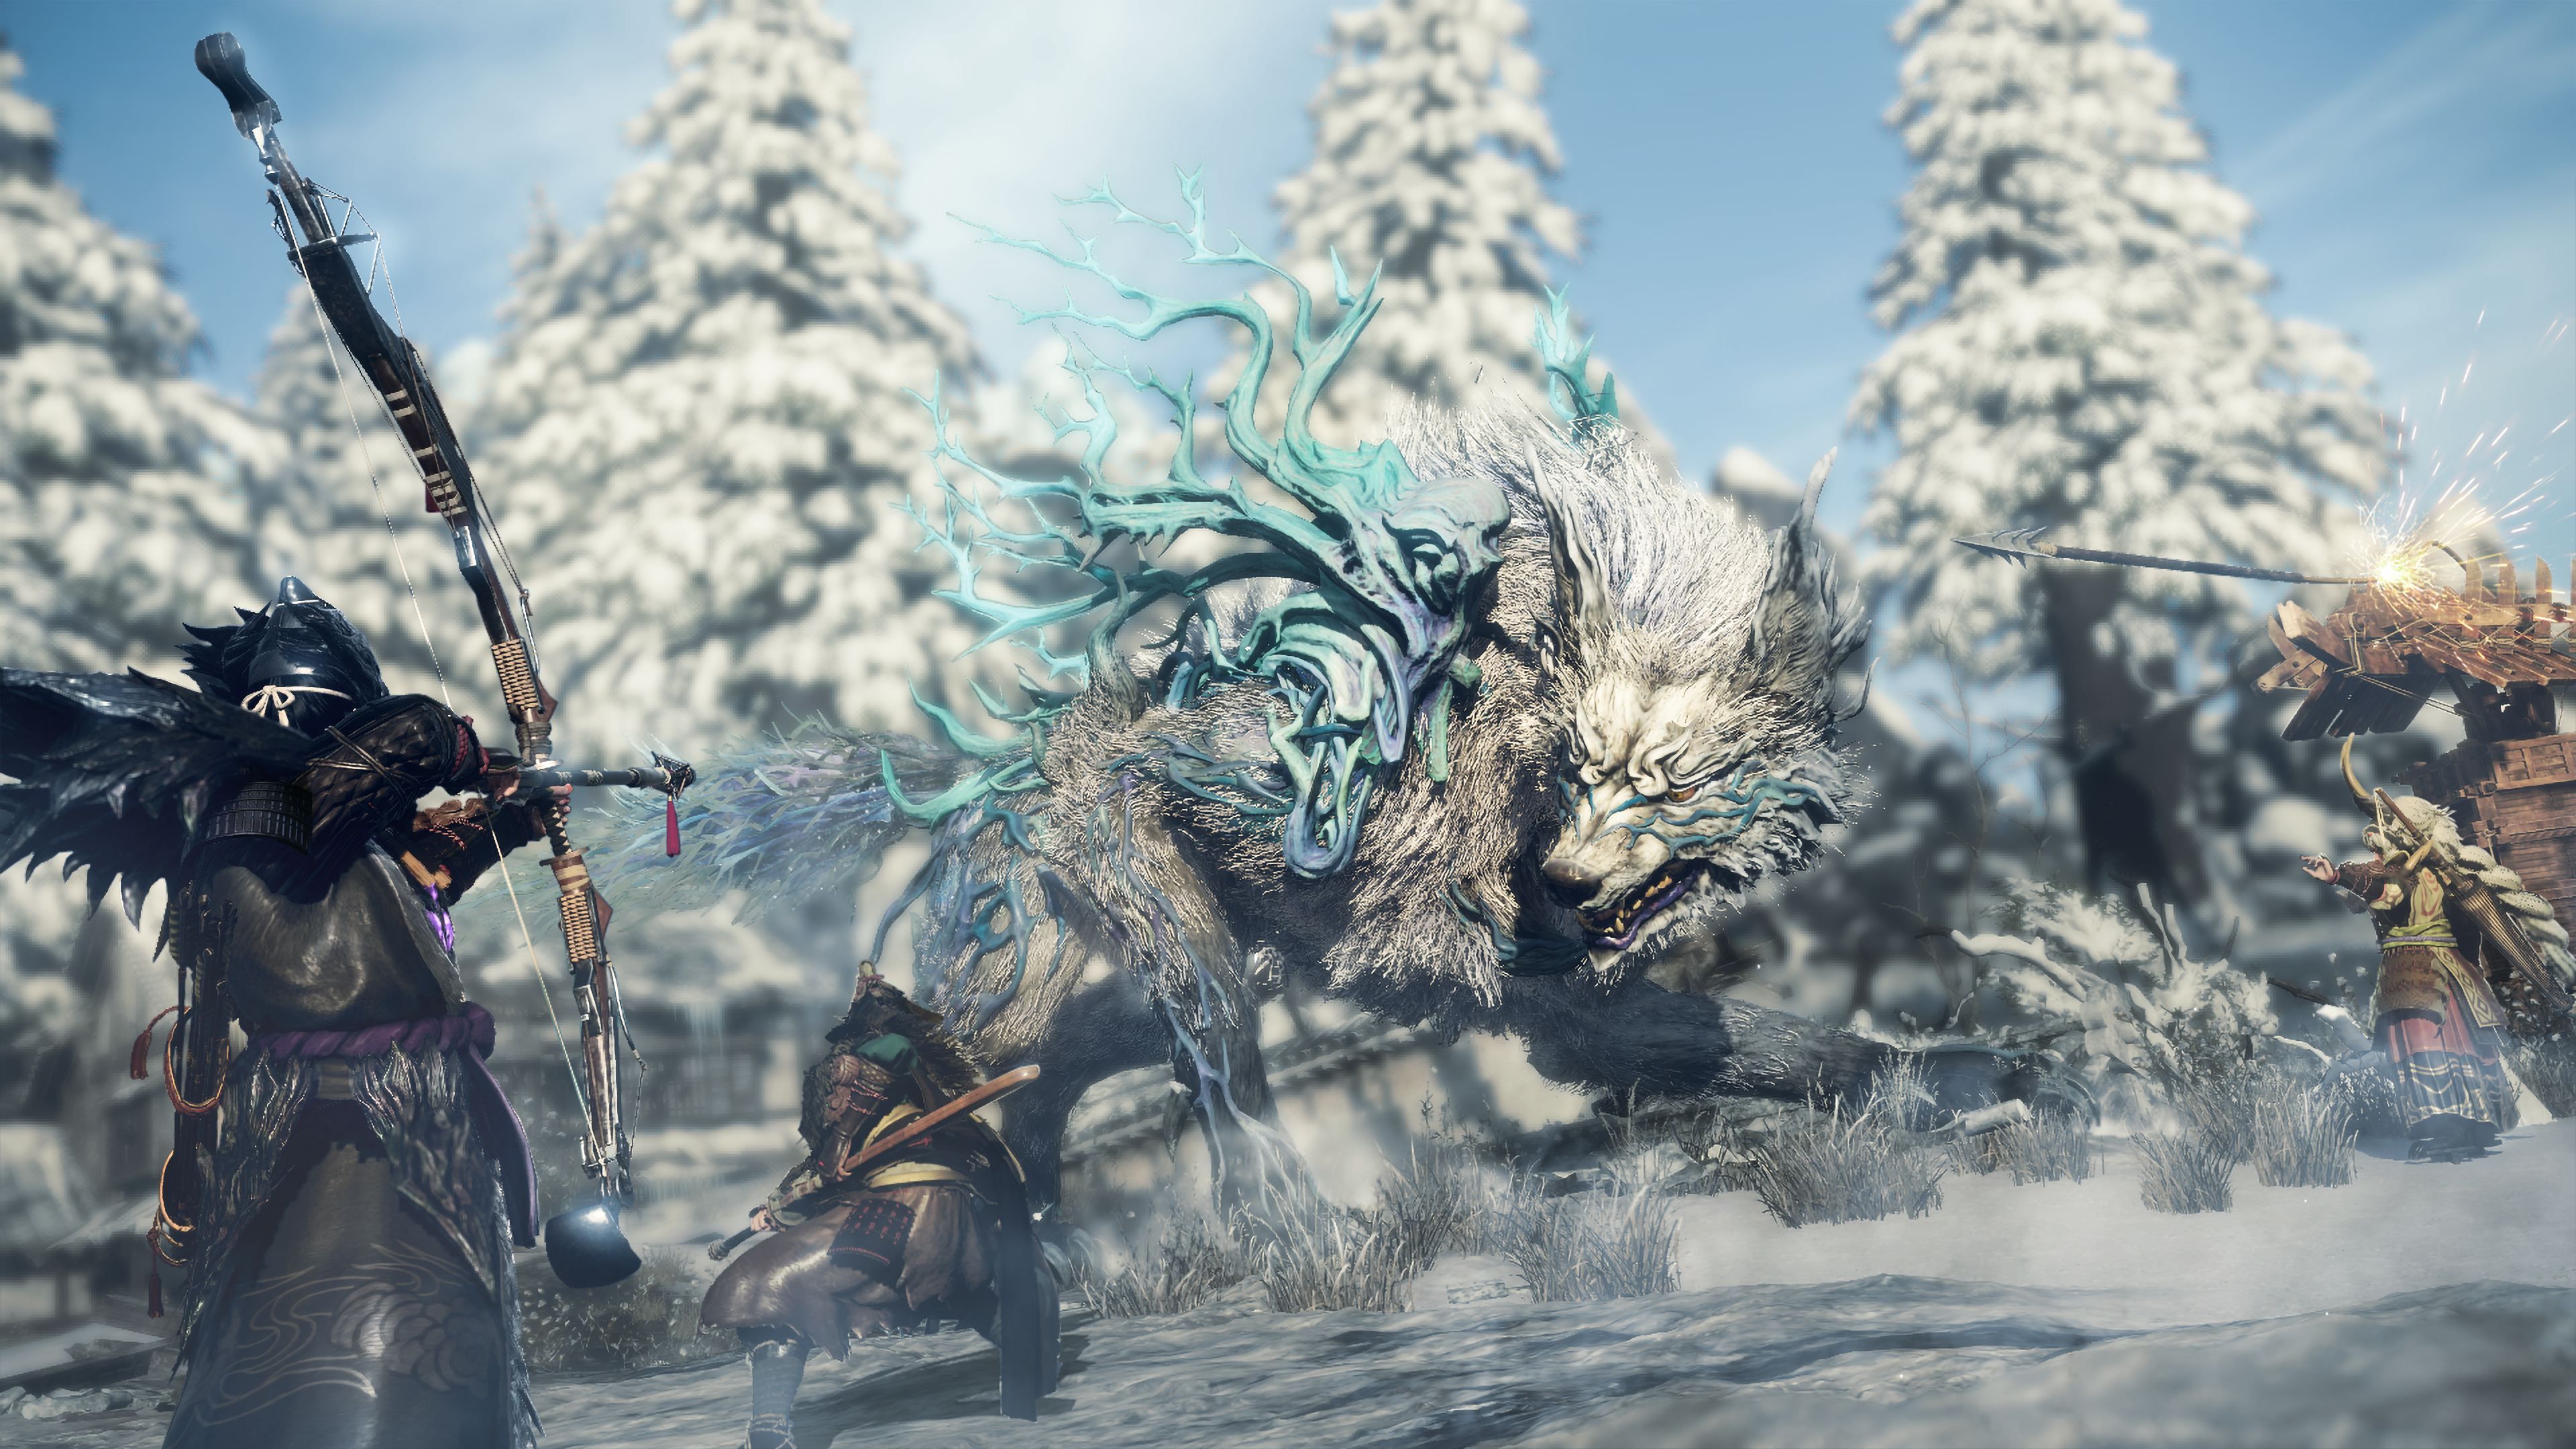 Wild Hearts player hunting a Deathstalker with a bow and arrow.